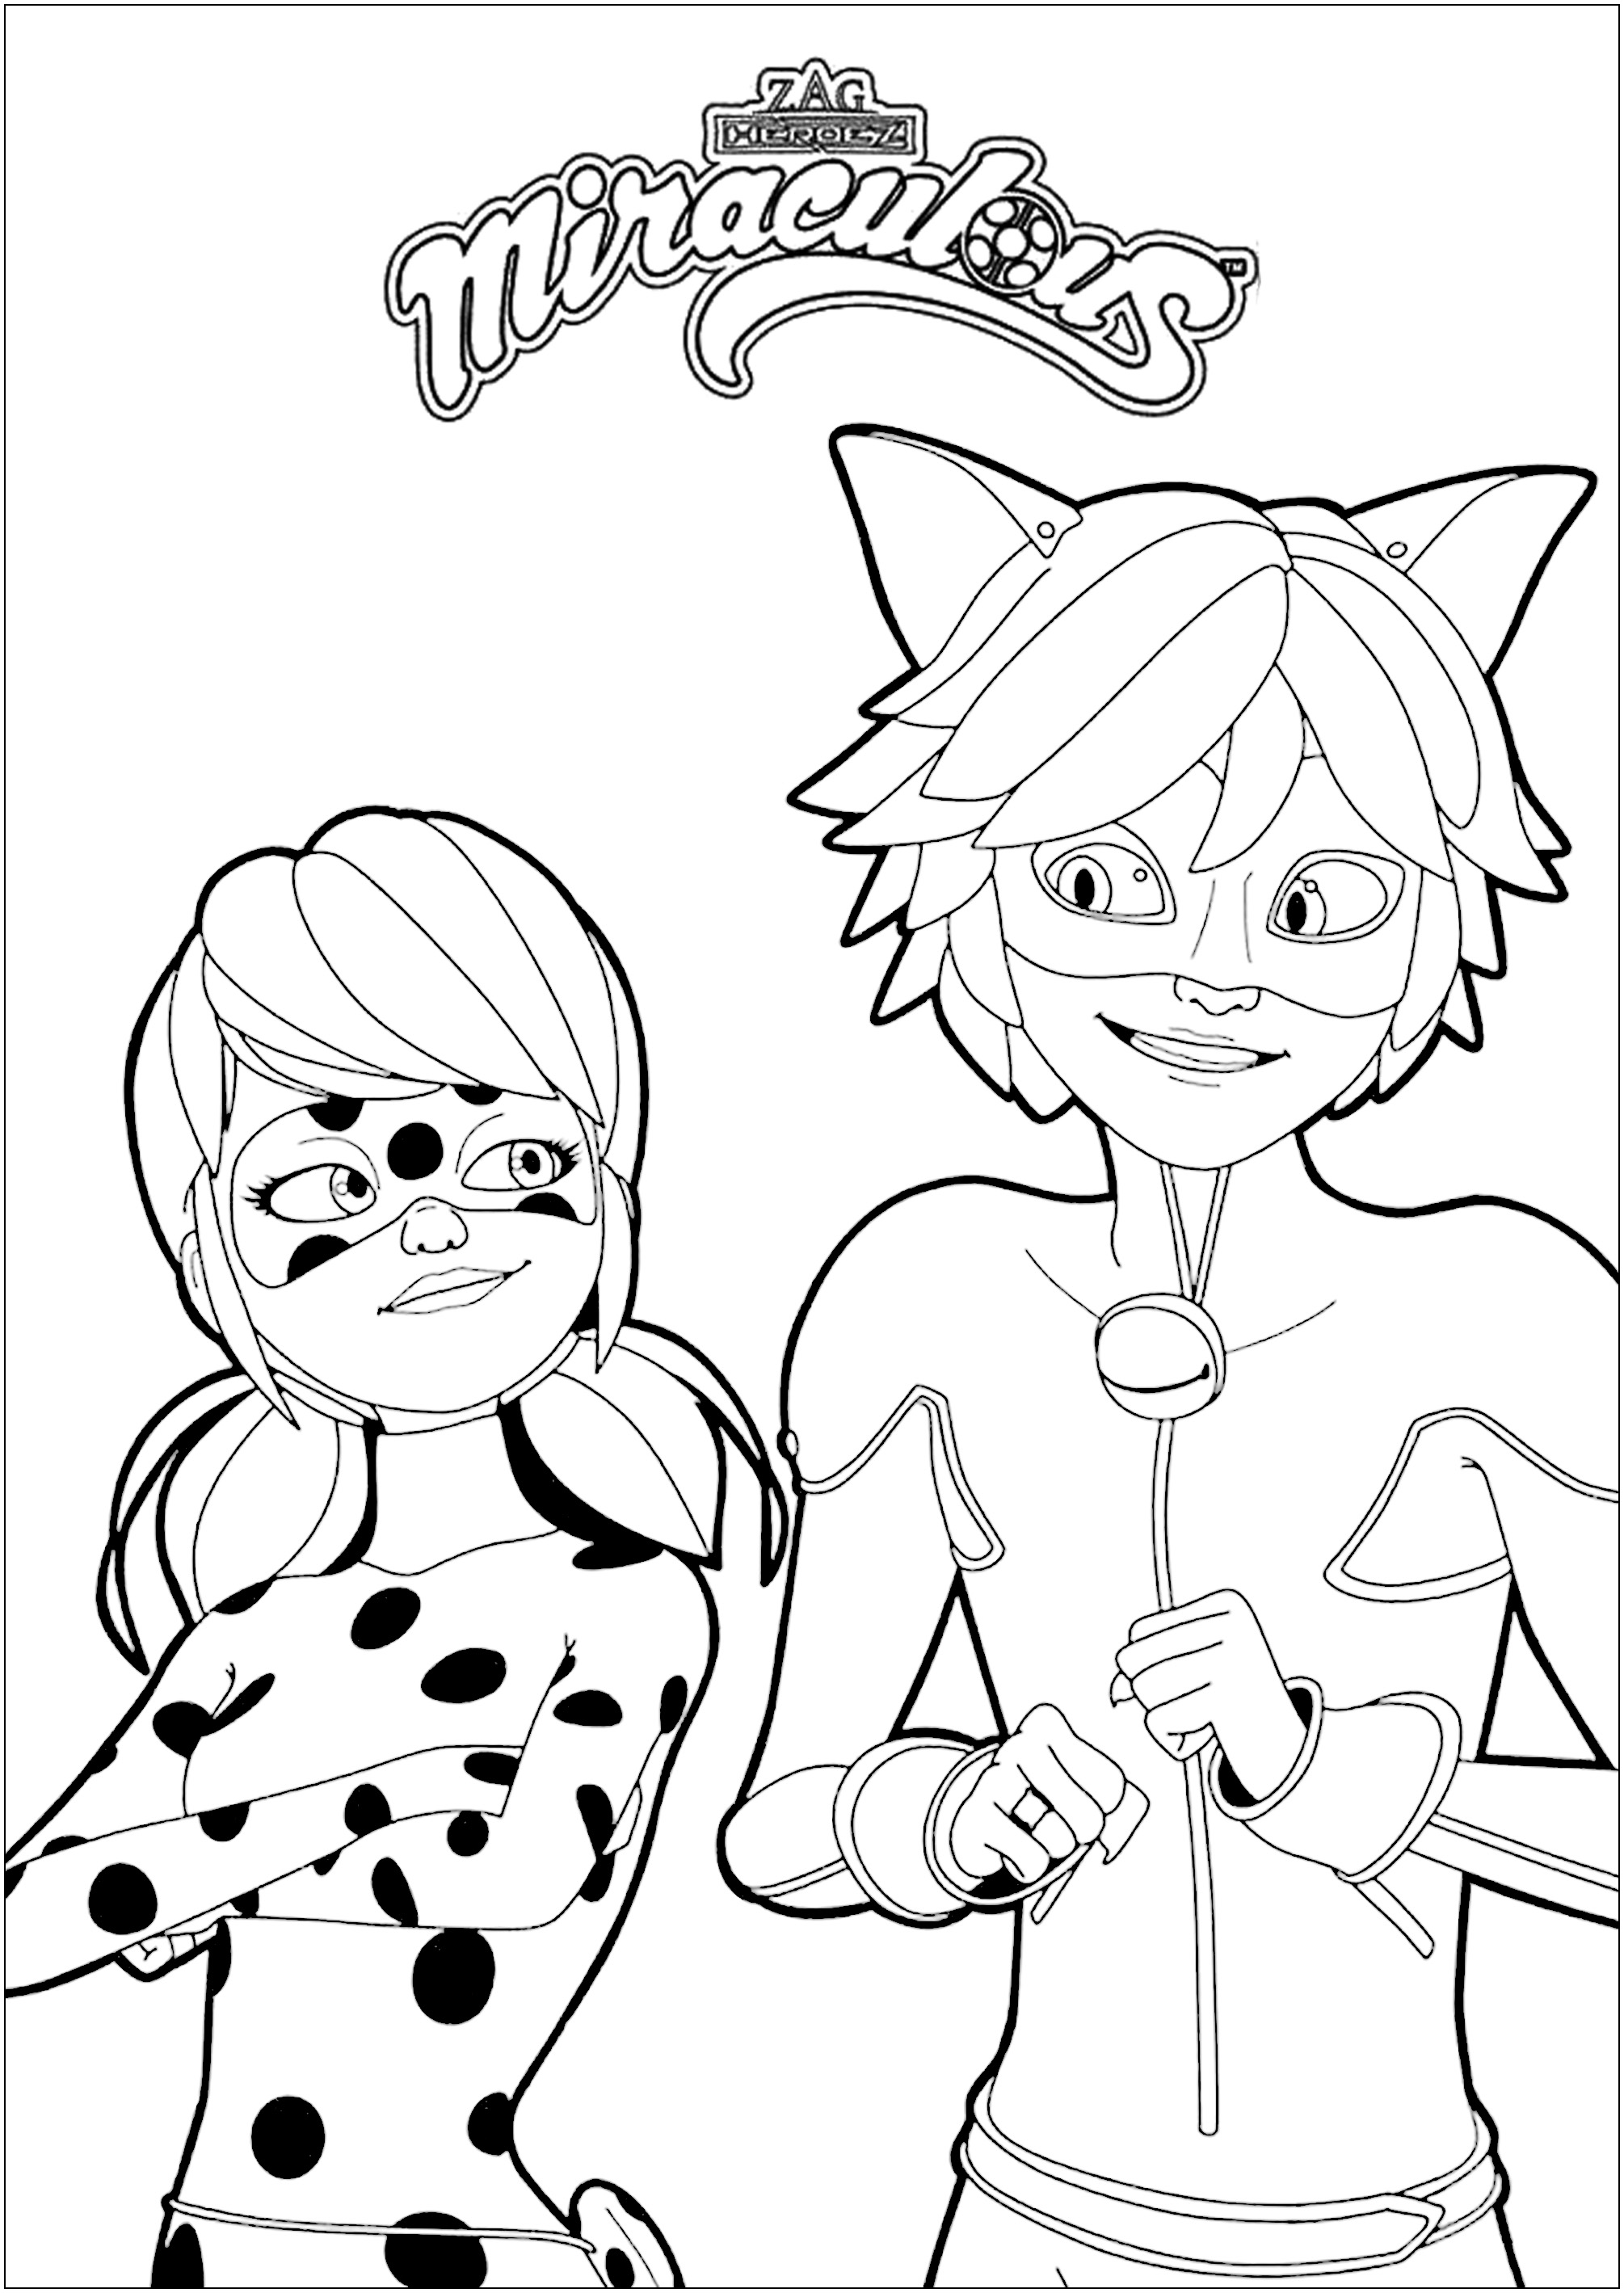 New Miraculous coloring game